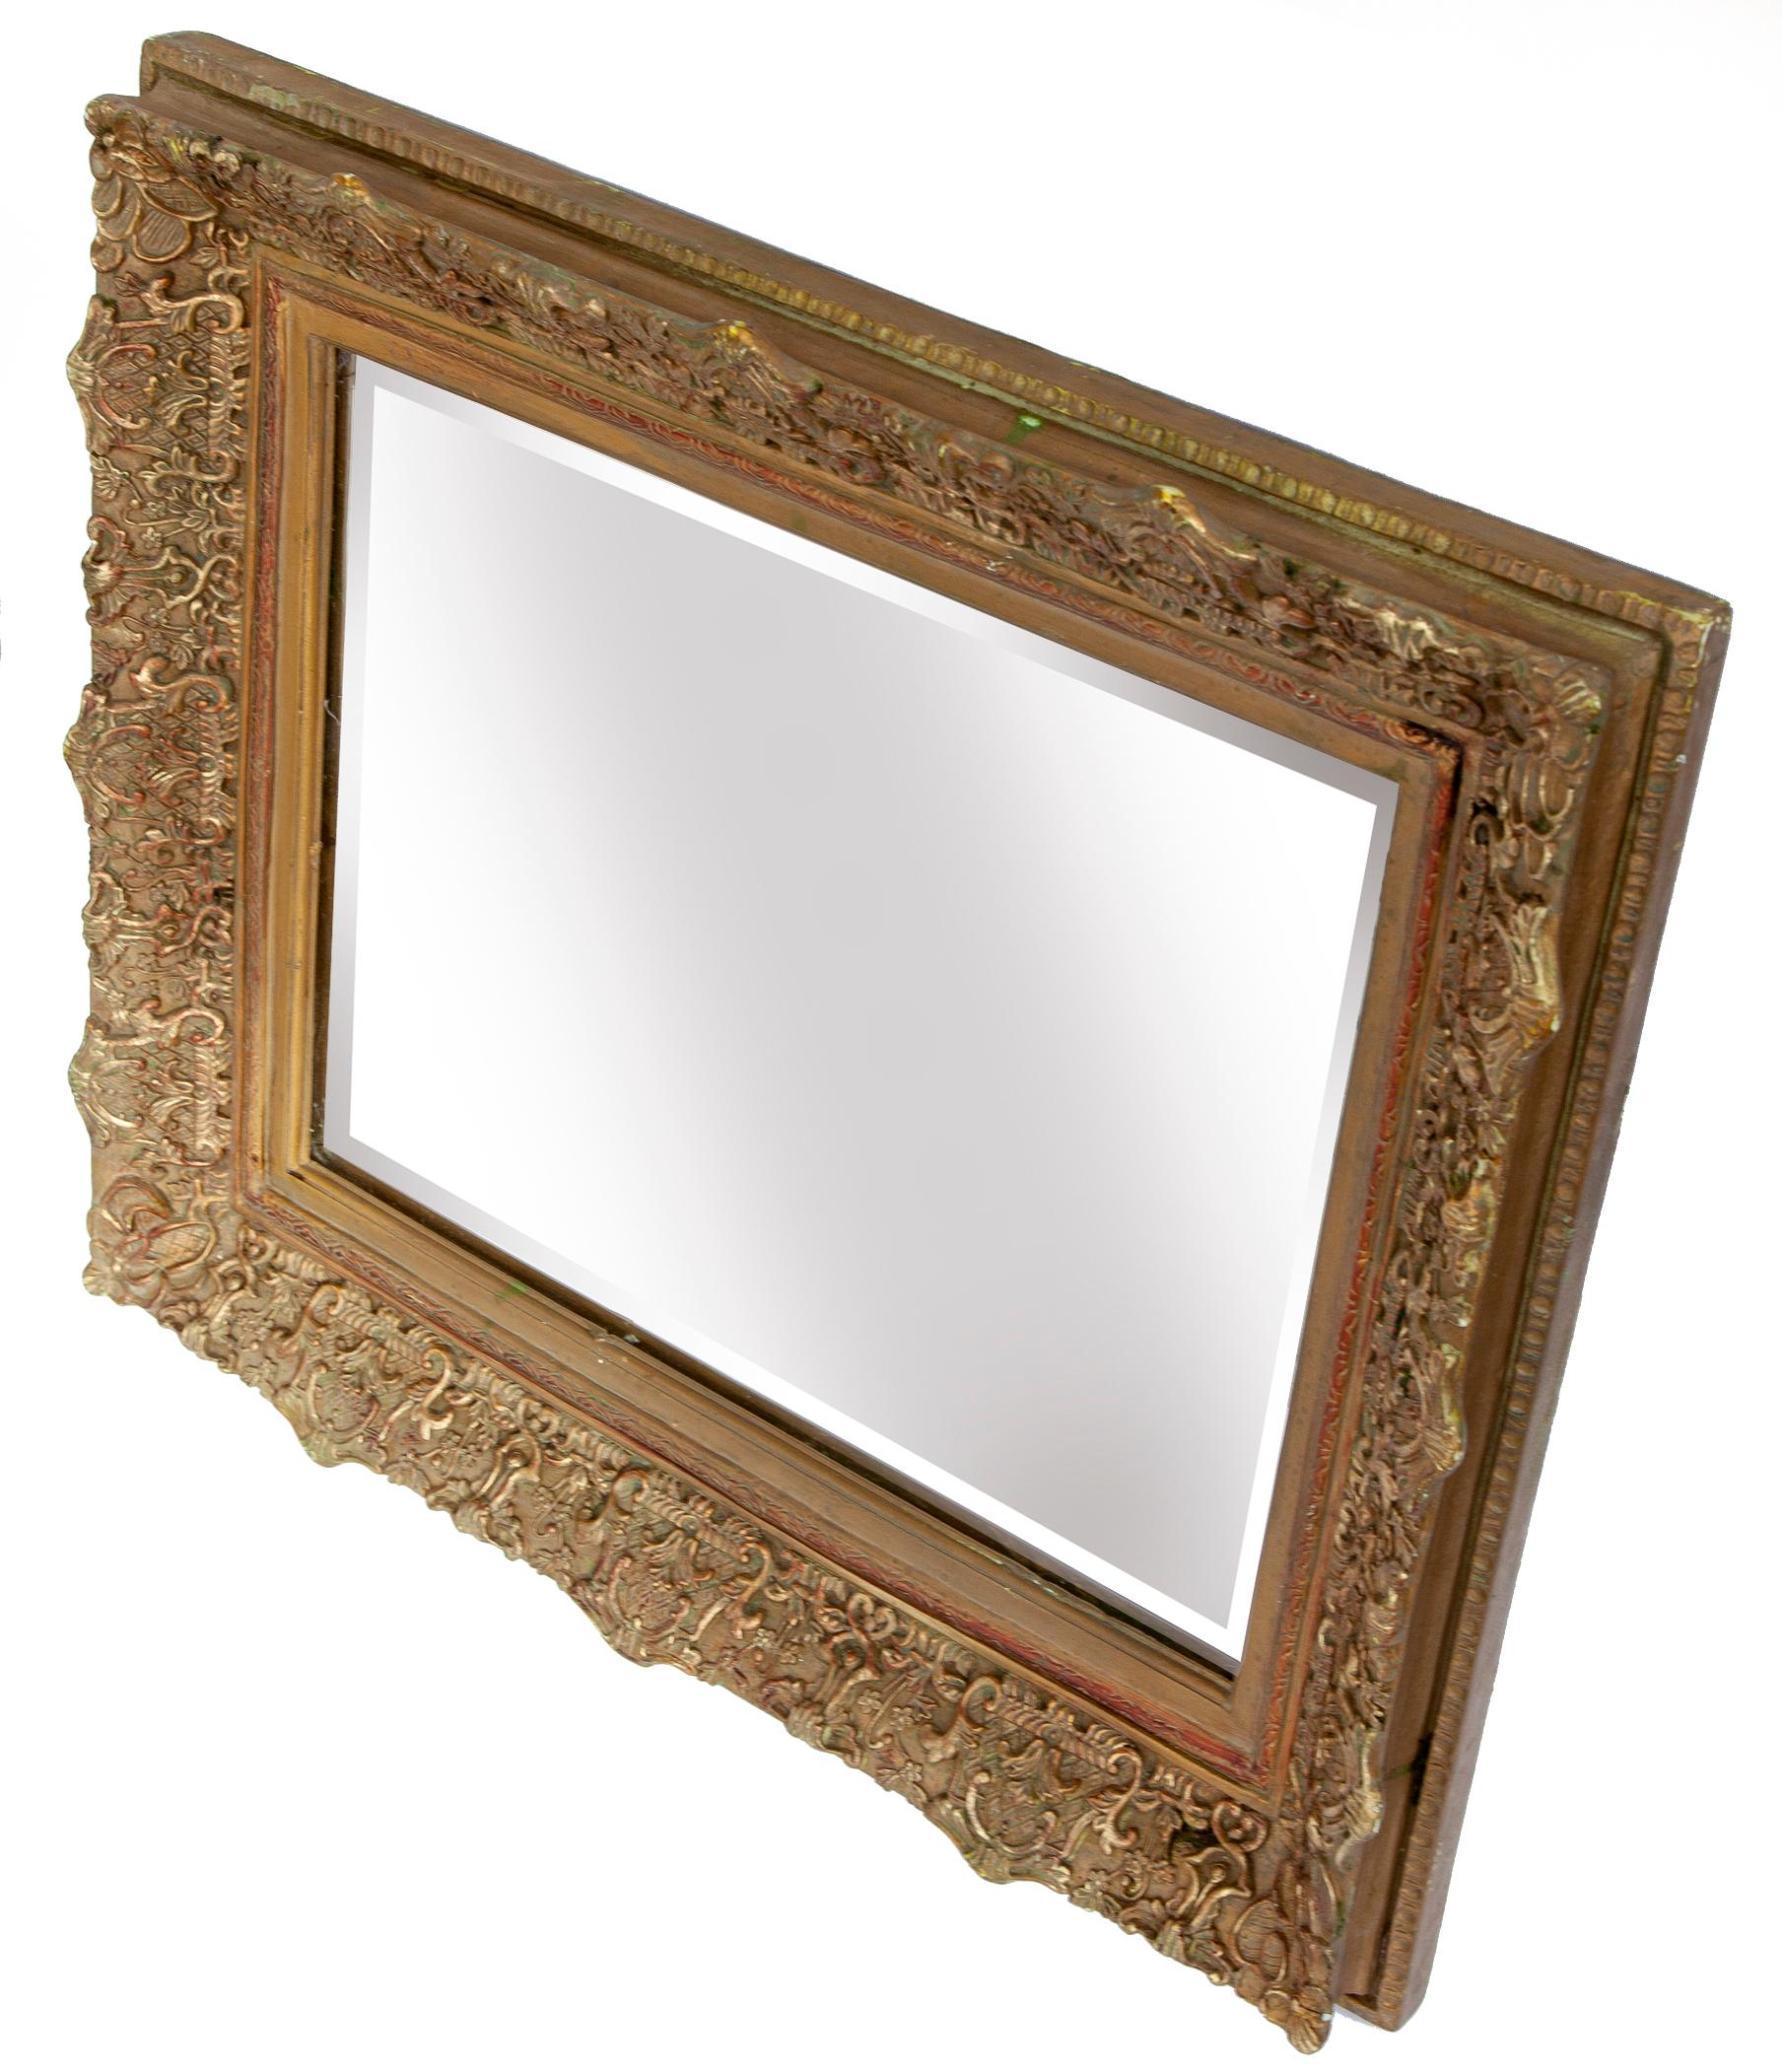 A late 19th century early 20th century Victorian framed beveled mirror with decorative surfaces & deep well, a lovely example of Victorian style. 
Very heavy & sturdy construction.